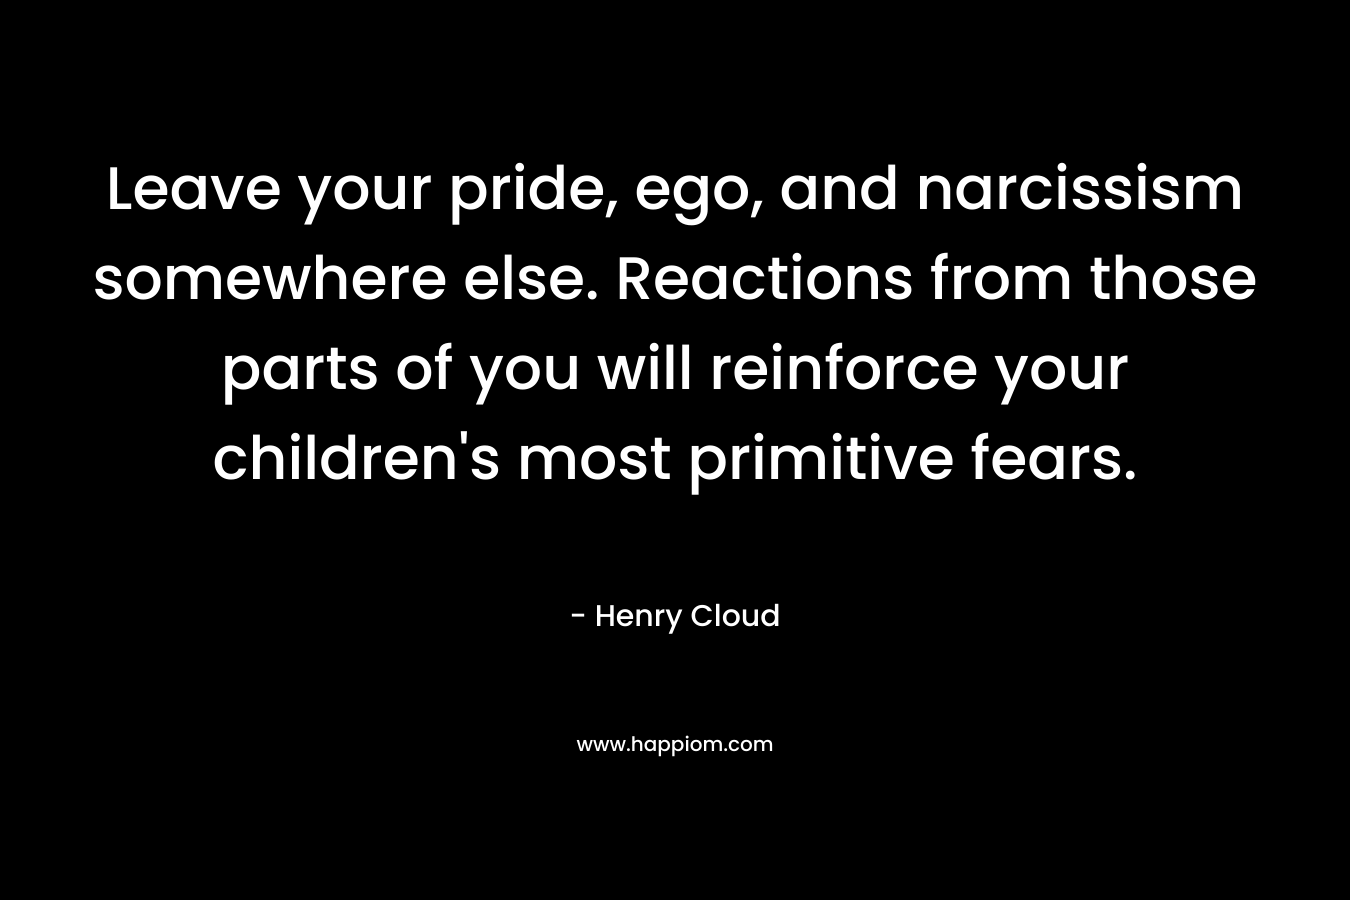 Leave your pride, ego, and narcissism somewhere else. Reactions from those parts of you will reinforce your children’s most primitive fears. – Henry Cloud